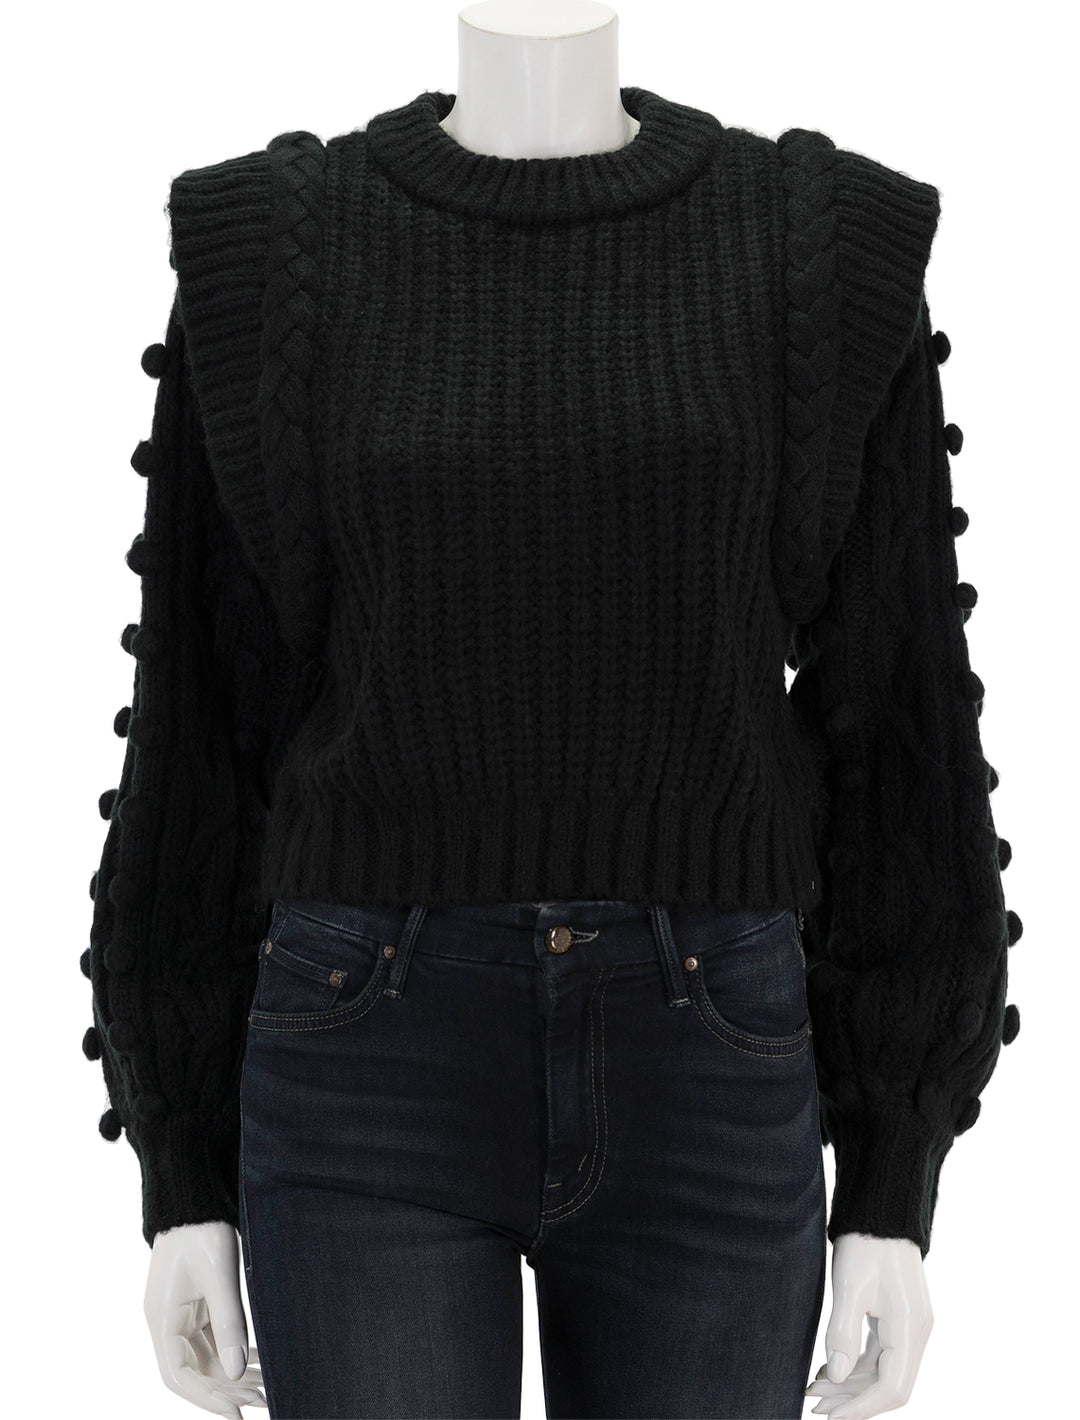 Front view of FARM Rio's black braided sweater.